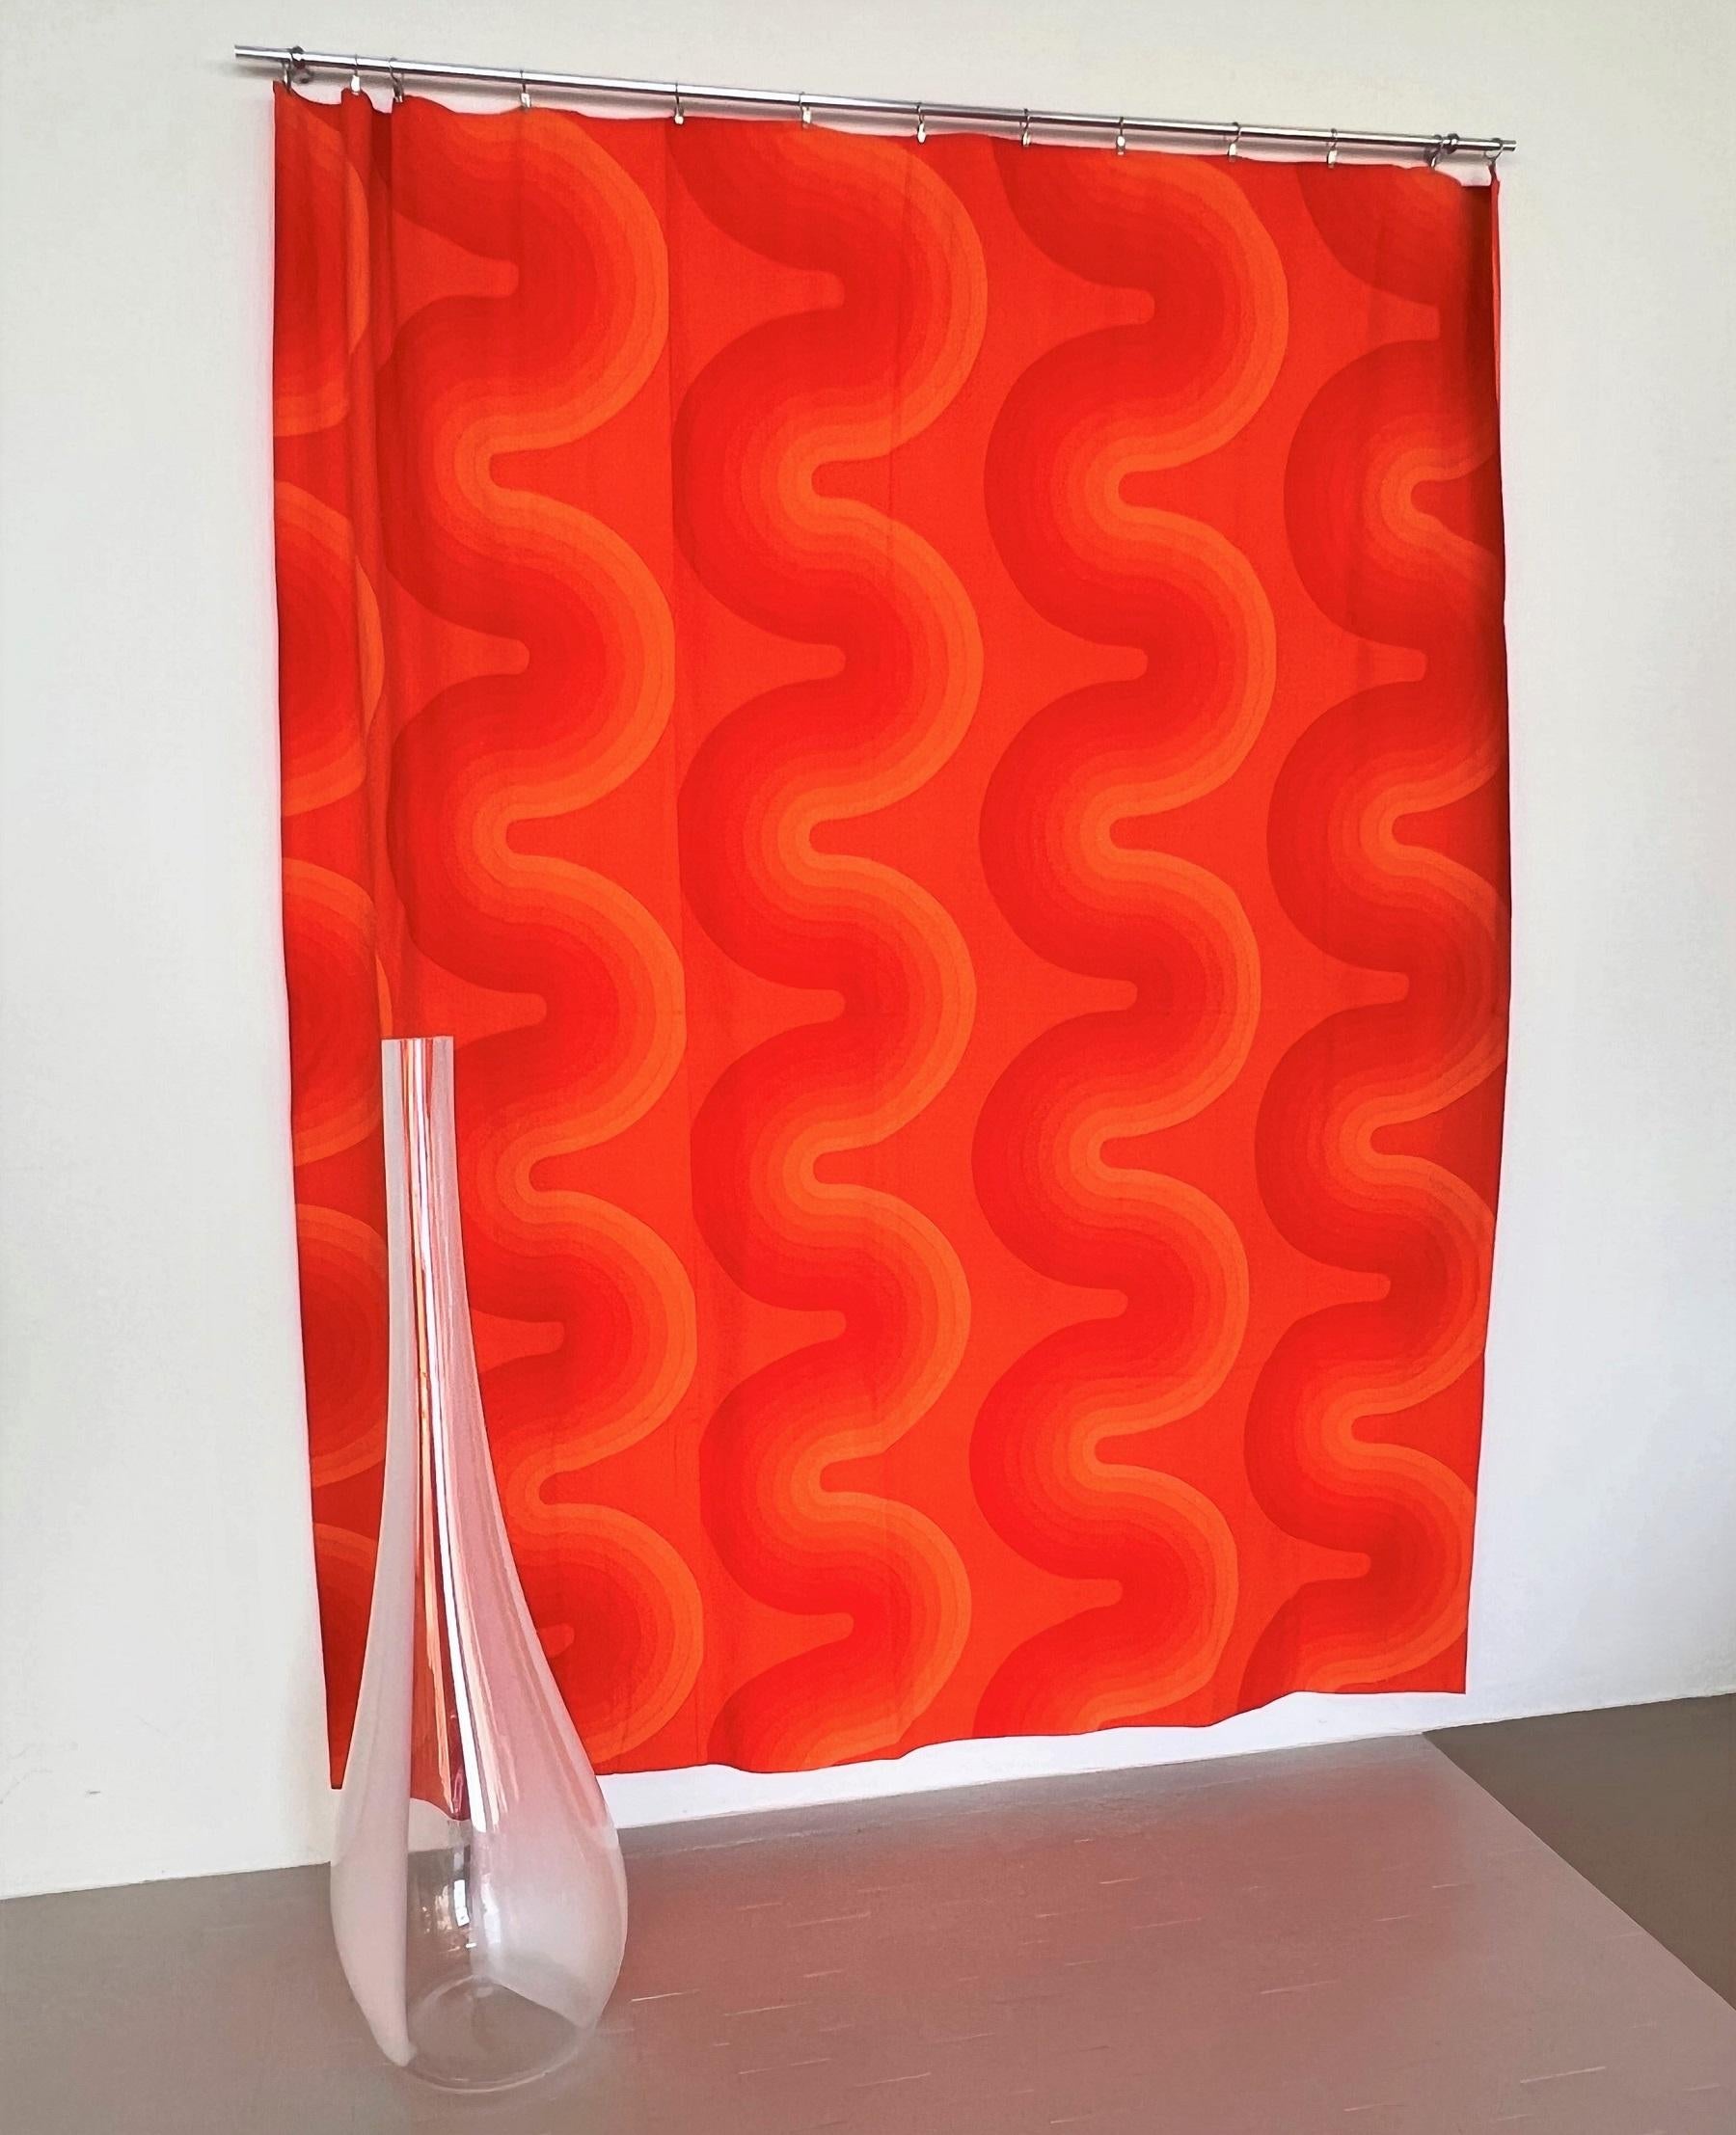 Swiss Verner Panton Original Fabric Panel Tapestry for Mira-X Collection, 1970s For Sale